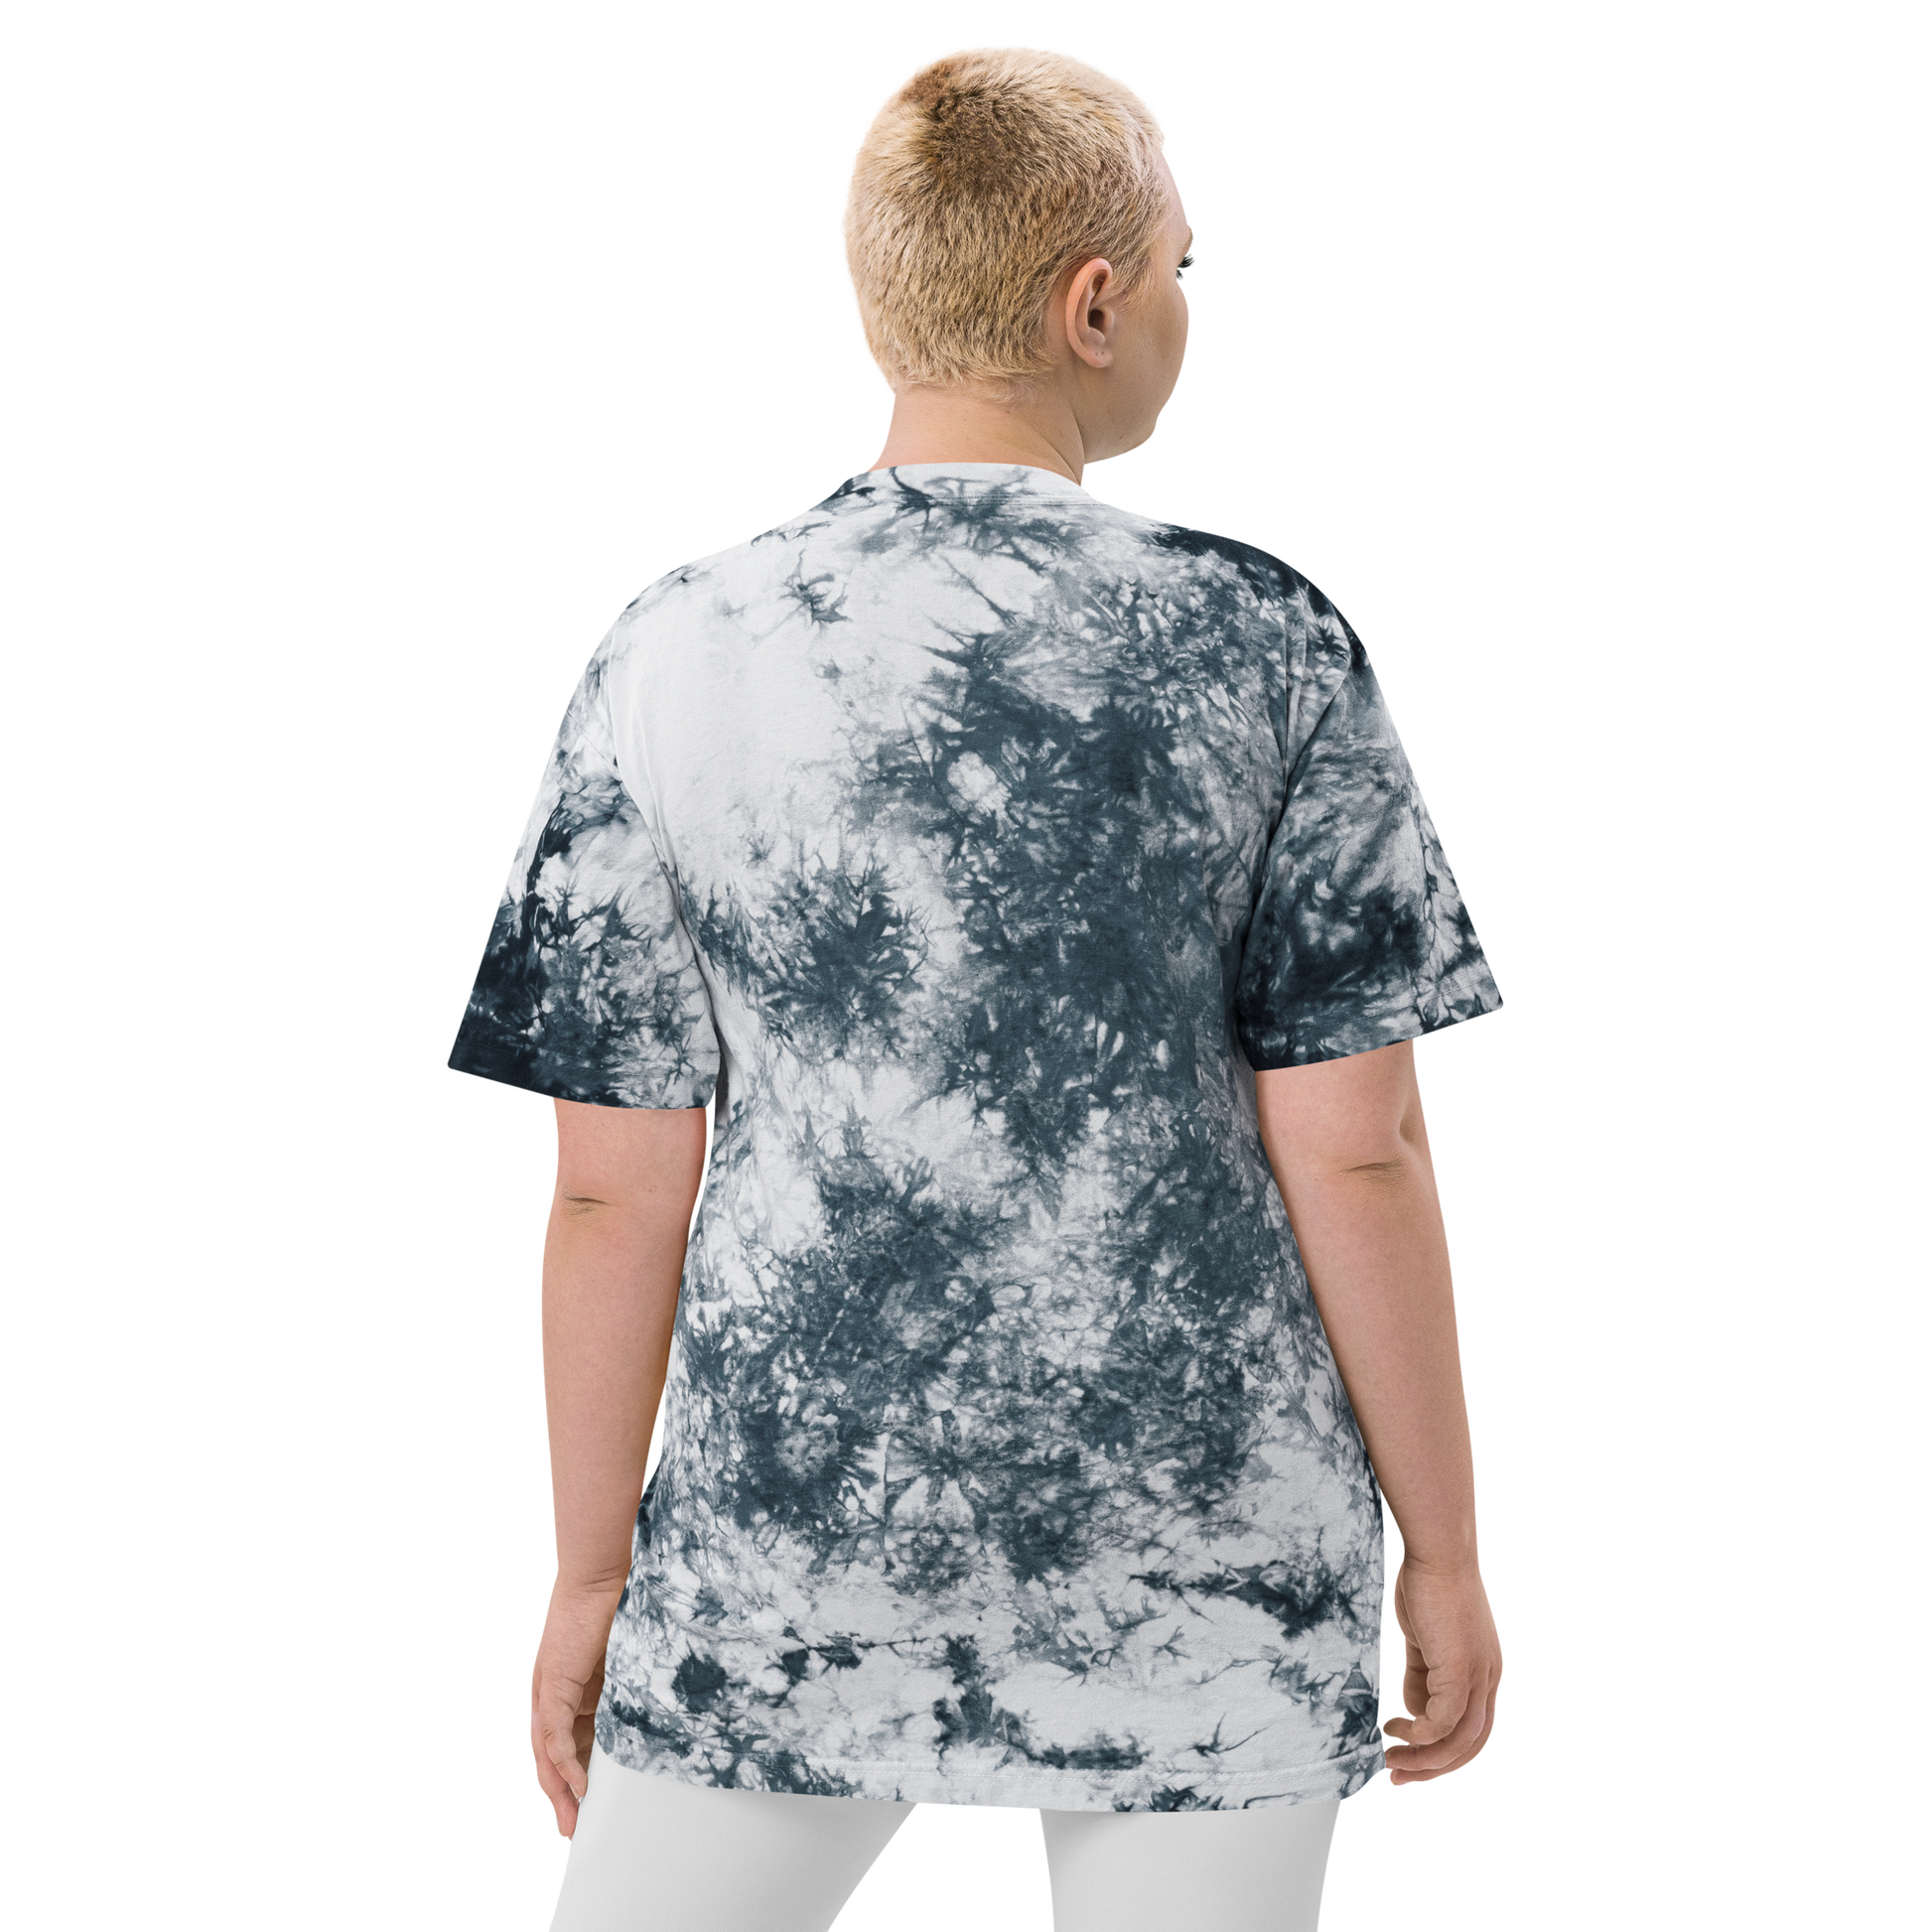 YHM Designs - YUL Montreal Oversized Tie-Dye T-Shirt - Crossed-X Design with Airport Code and Vintage Propliner - White Embroidery - Image 17